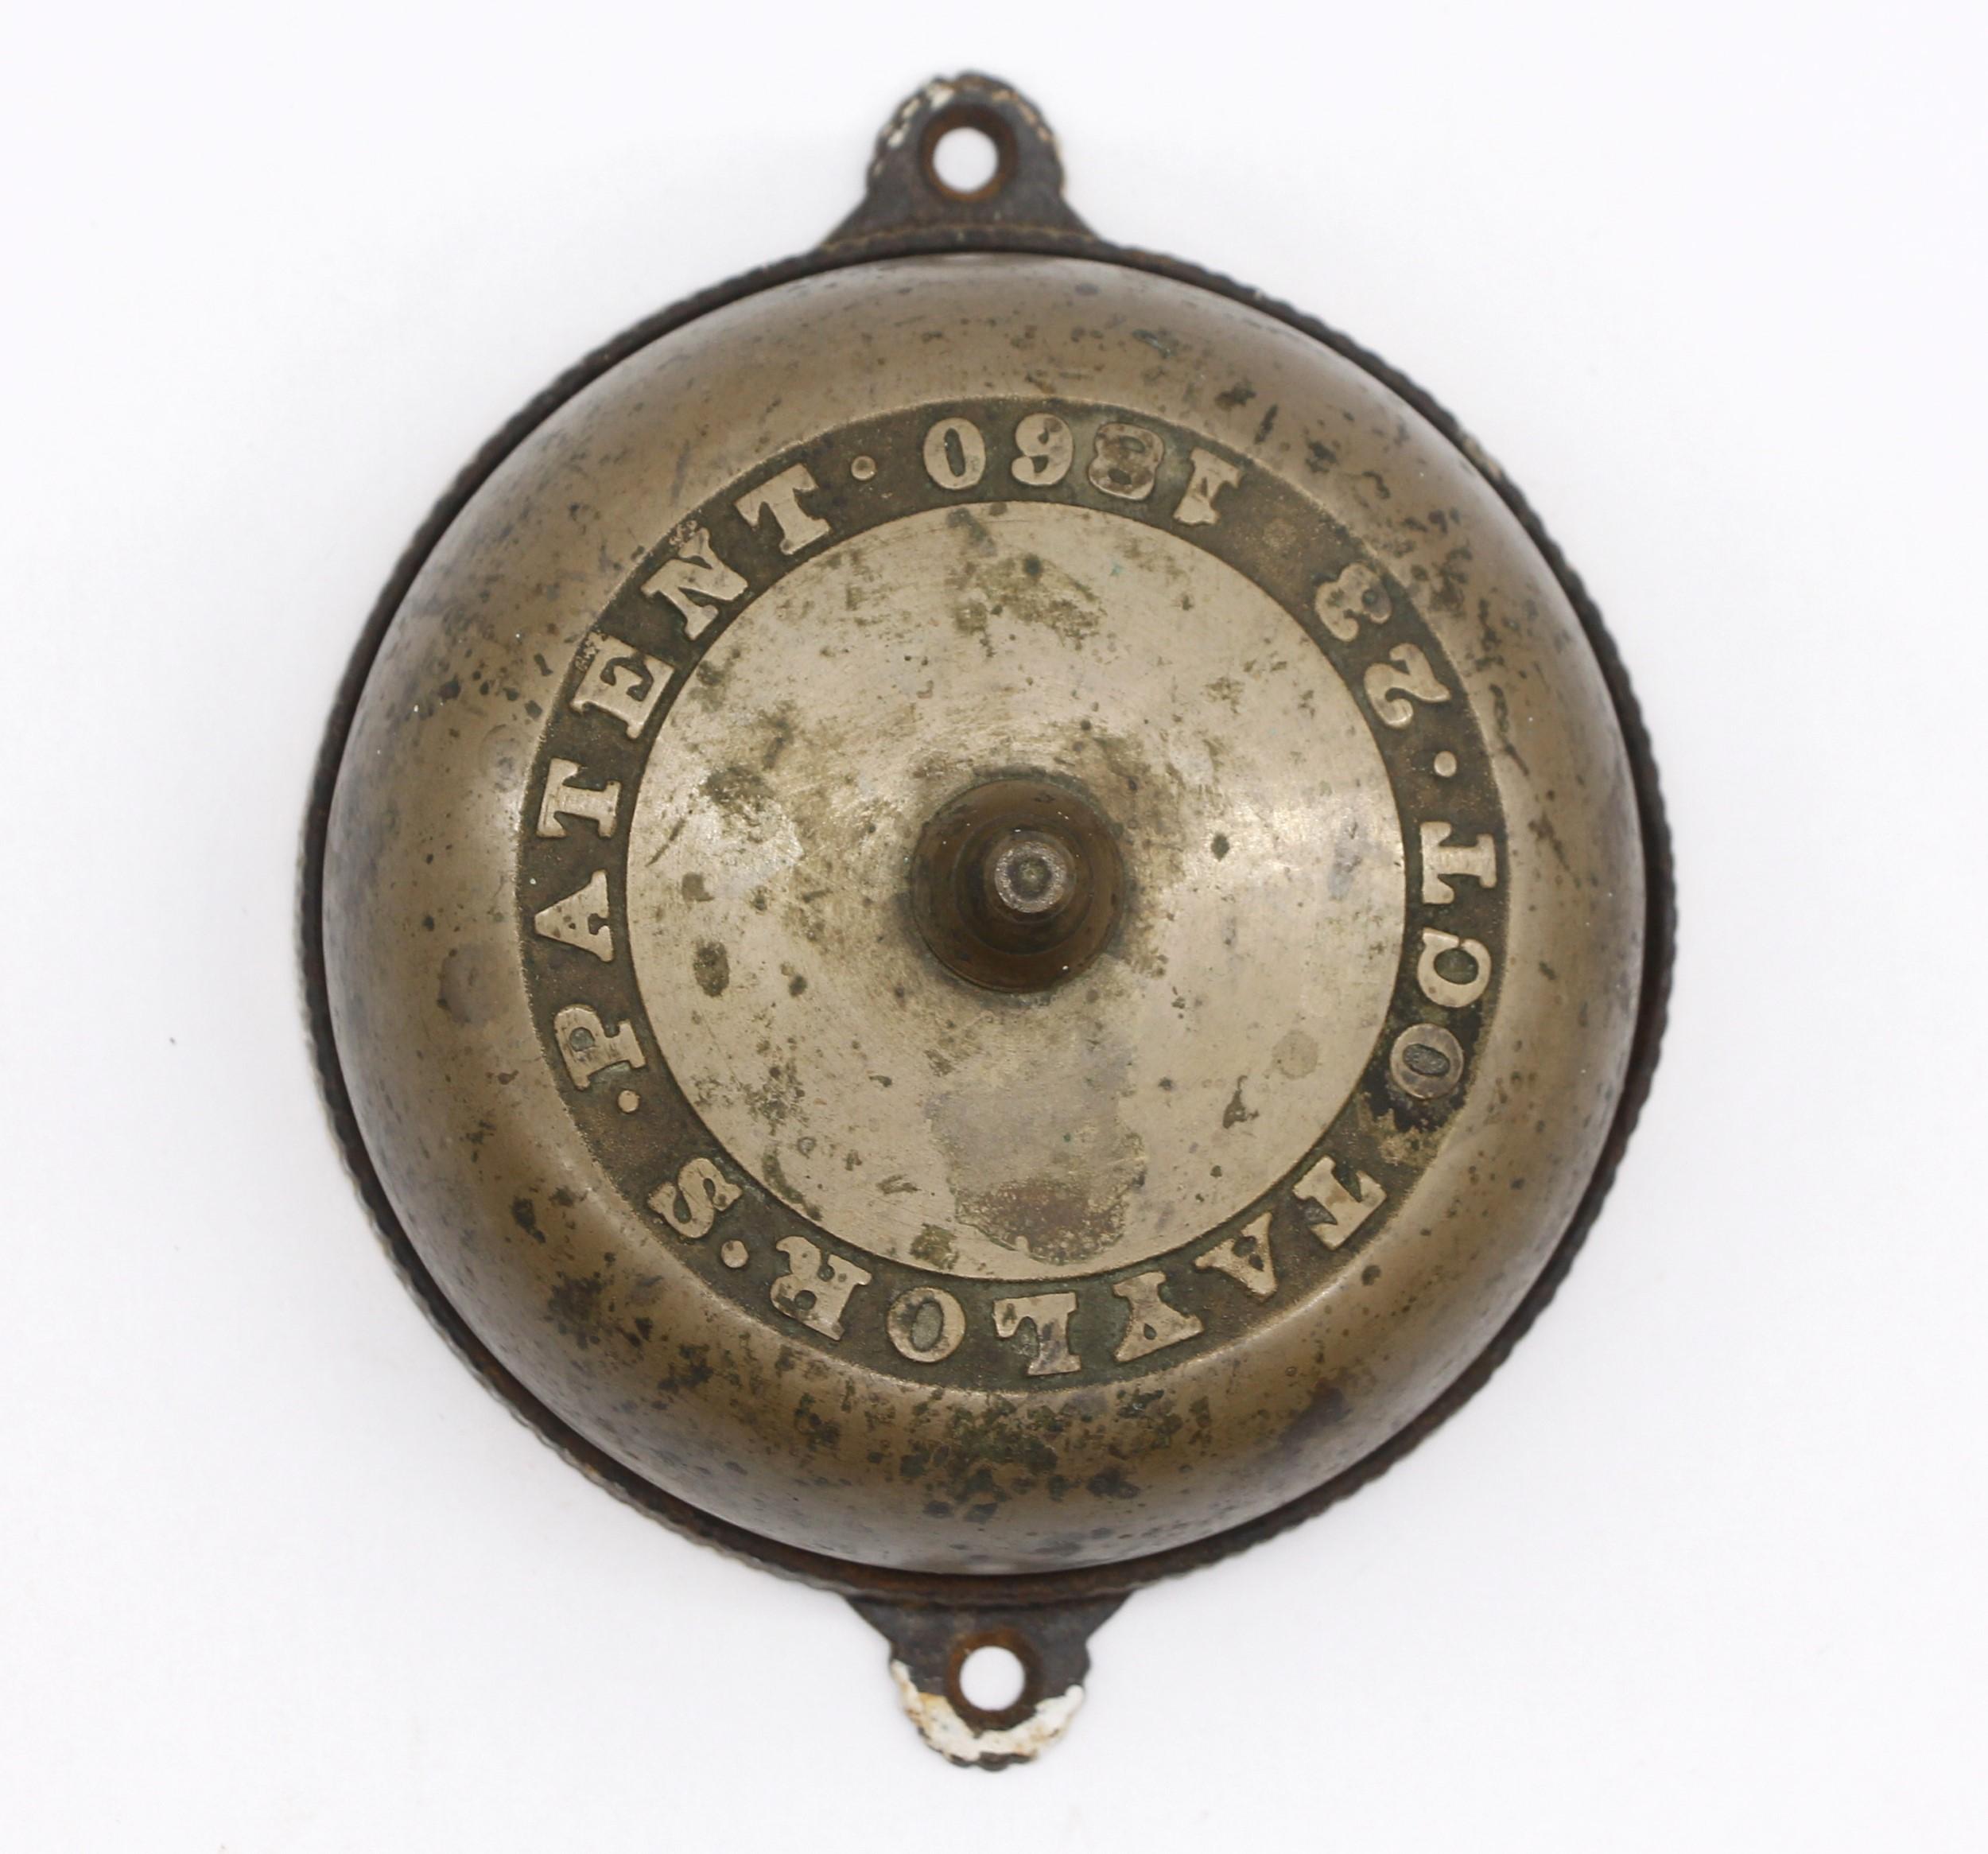 Original 1860s antique mechanical doorbell made by Taylor and is in working condition. Taylor is one of the earliest known manufactures of mechanical bells. Brass cover with a cast iron. It operates by turning the round finger knob that inserts in